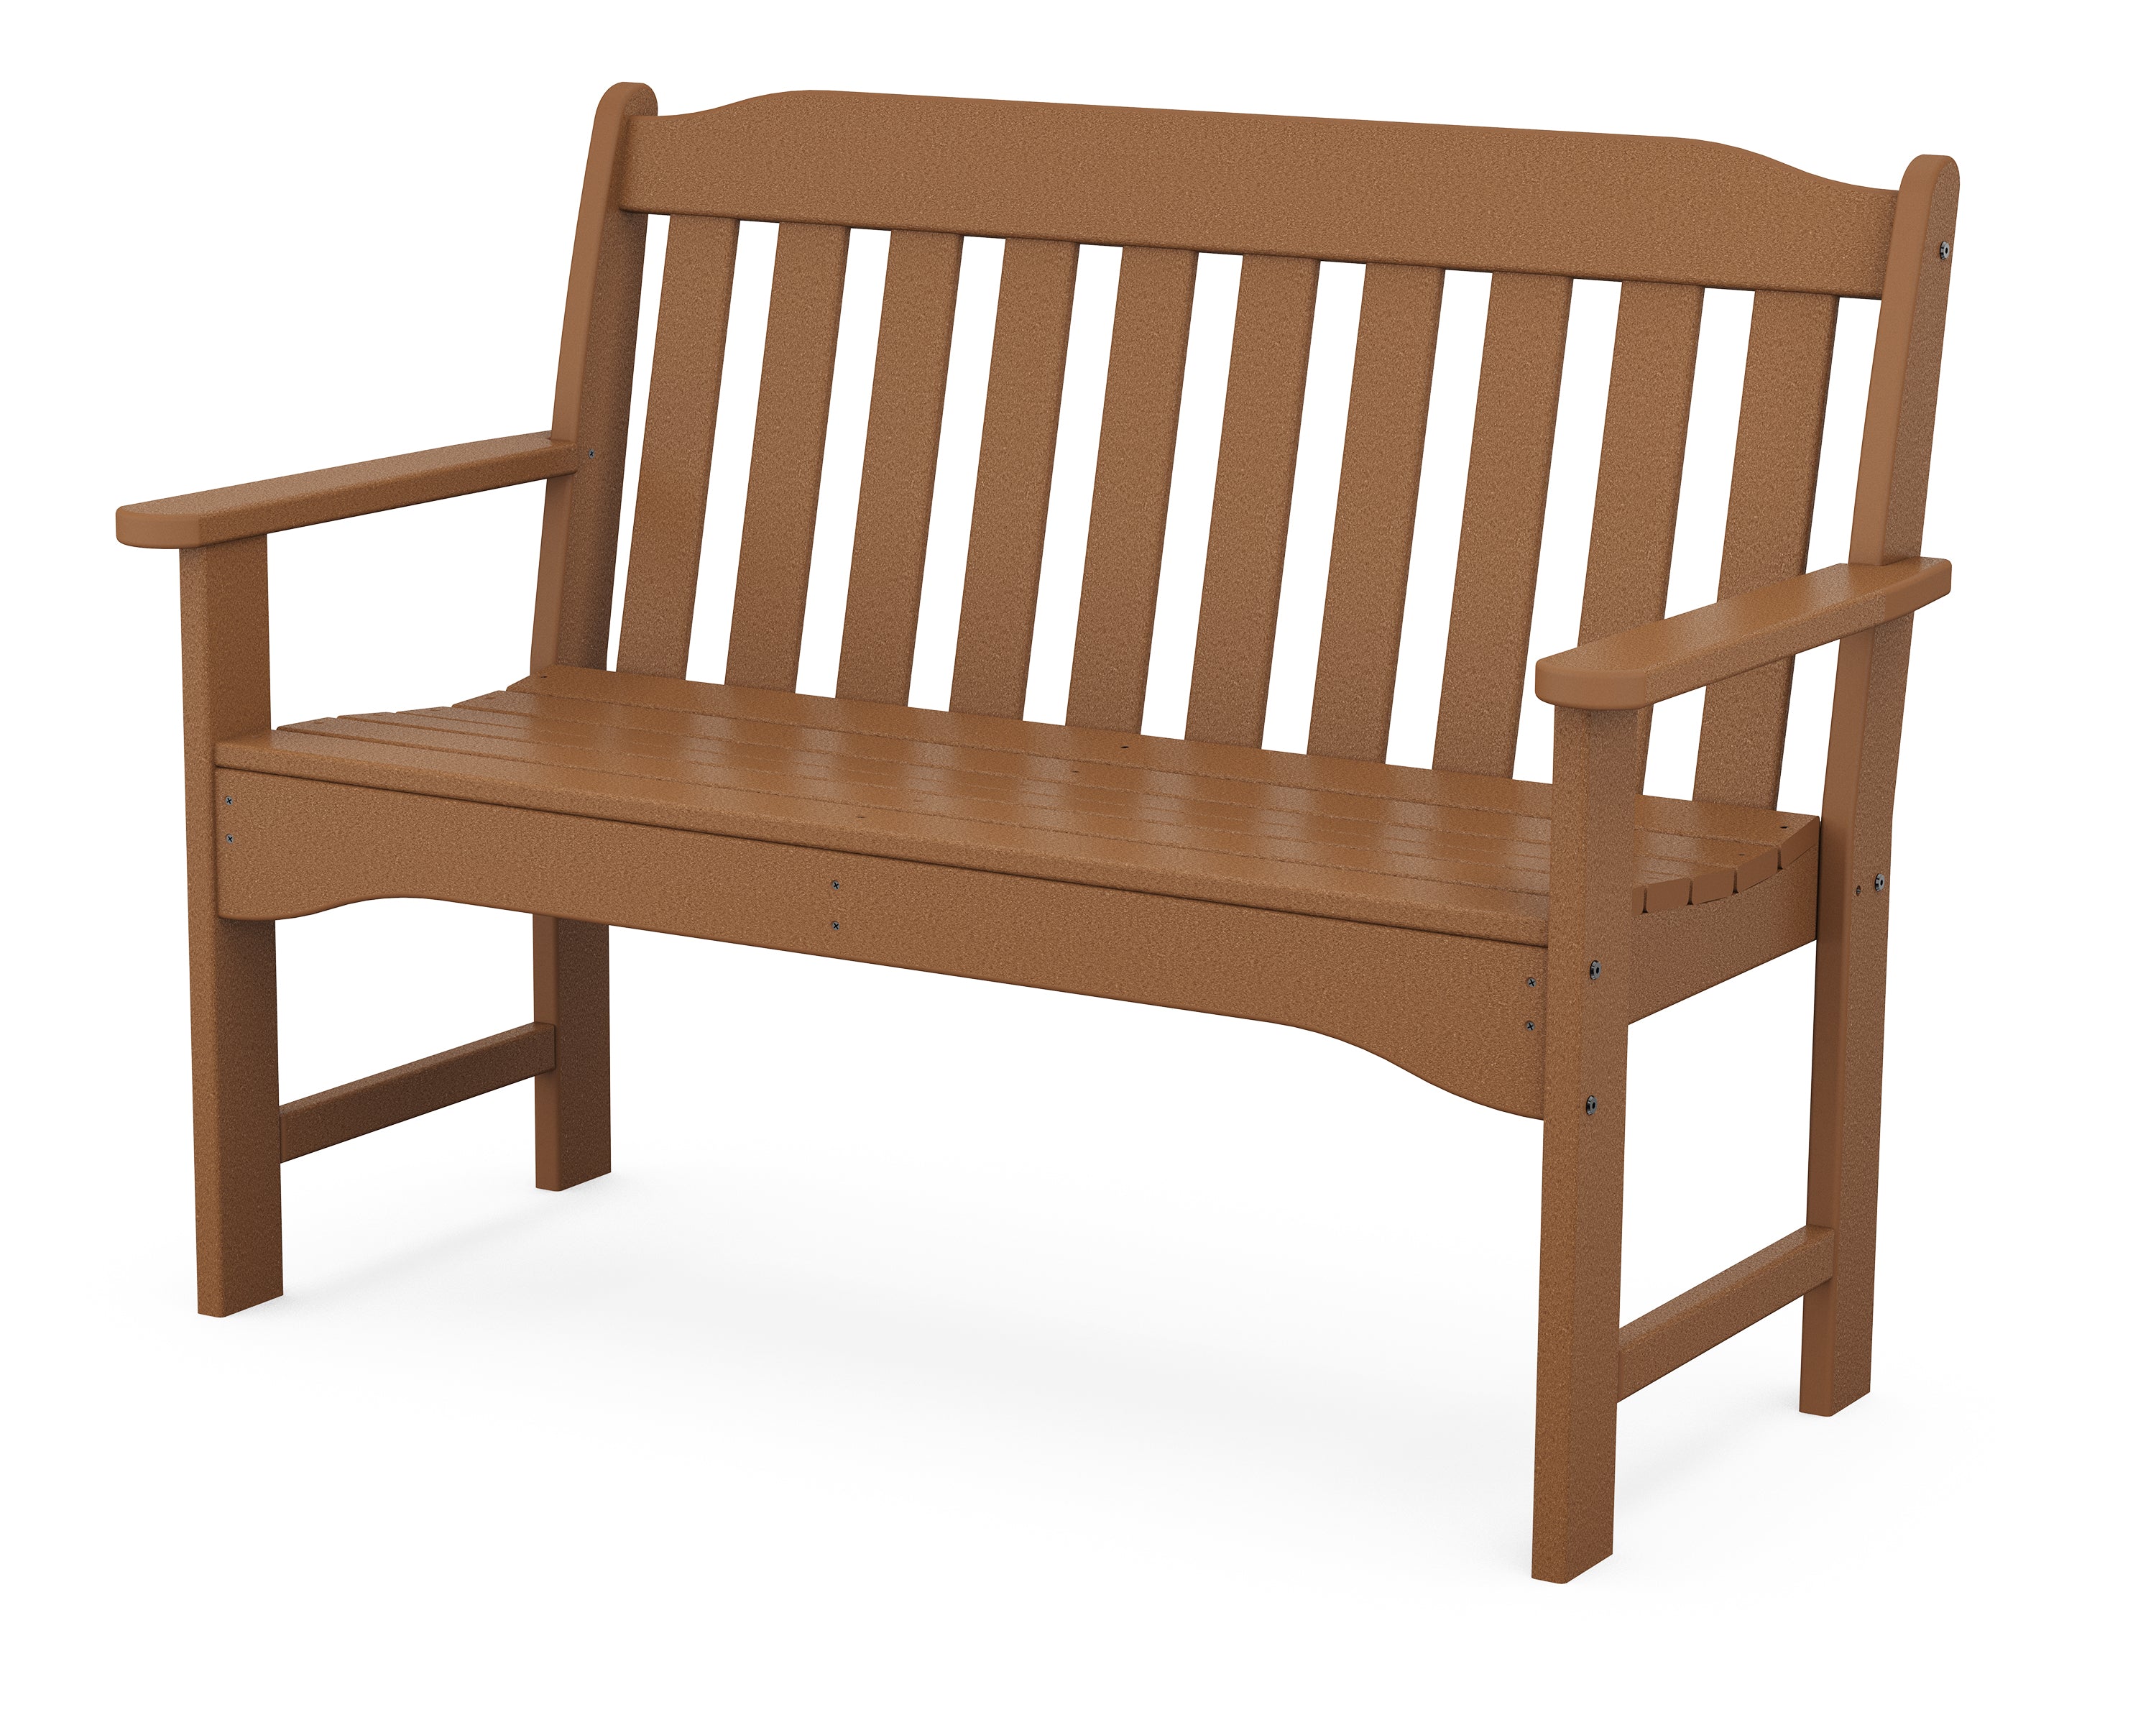 Country Living Country Living 48" Garden Bench in Teak